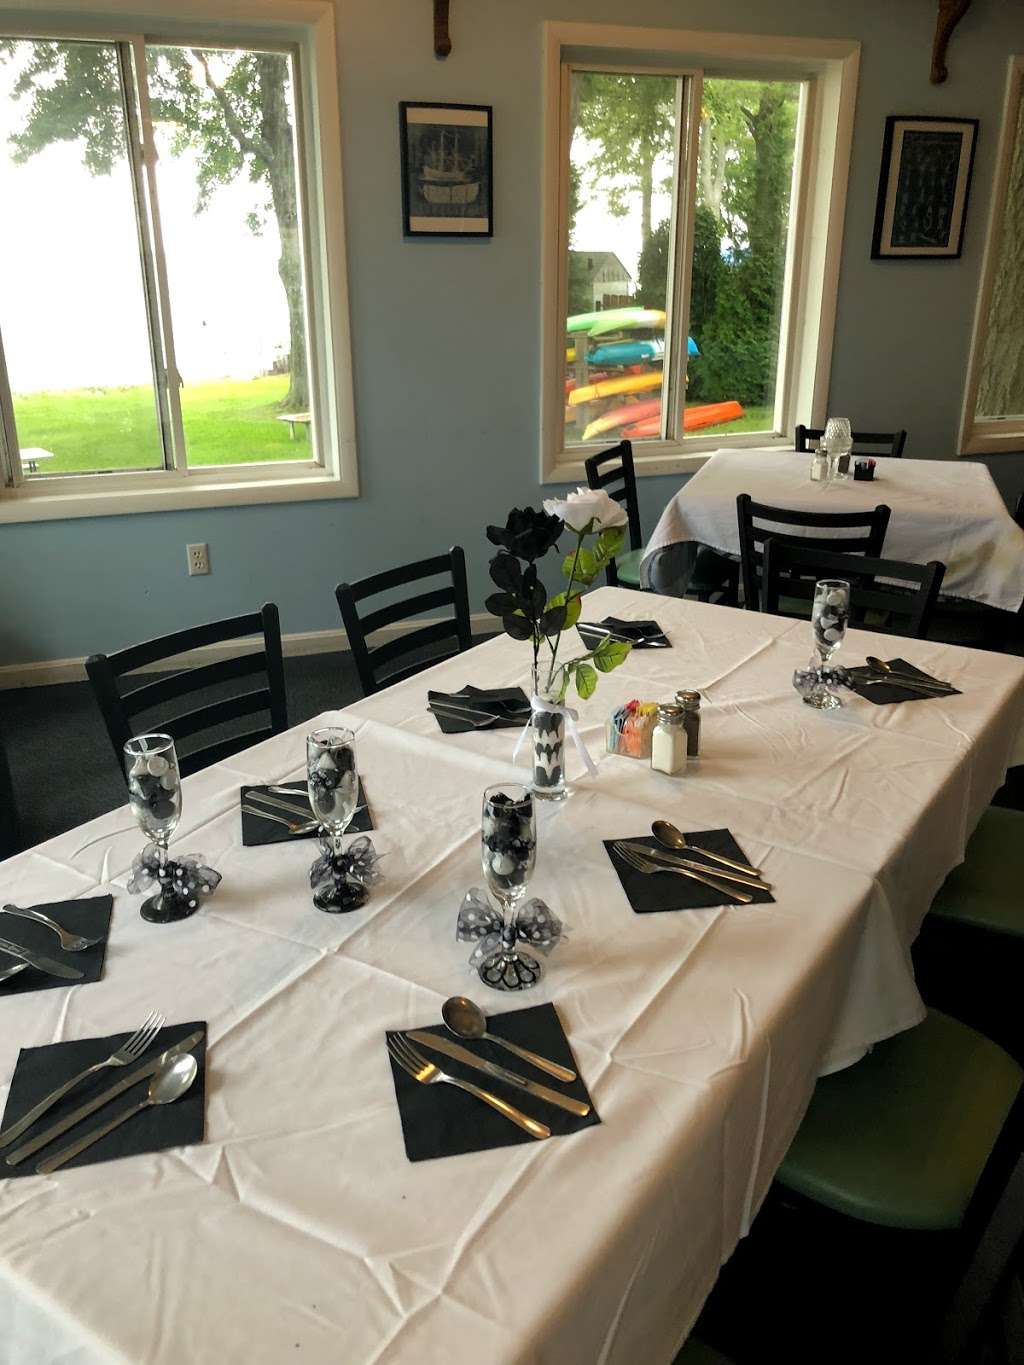 Island View Waterfront Cafe | 2542 Island View Rd, Essex, MD 21221 | Phone: (410) 687-9799